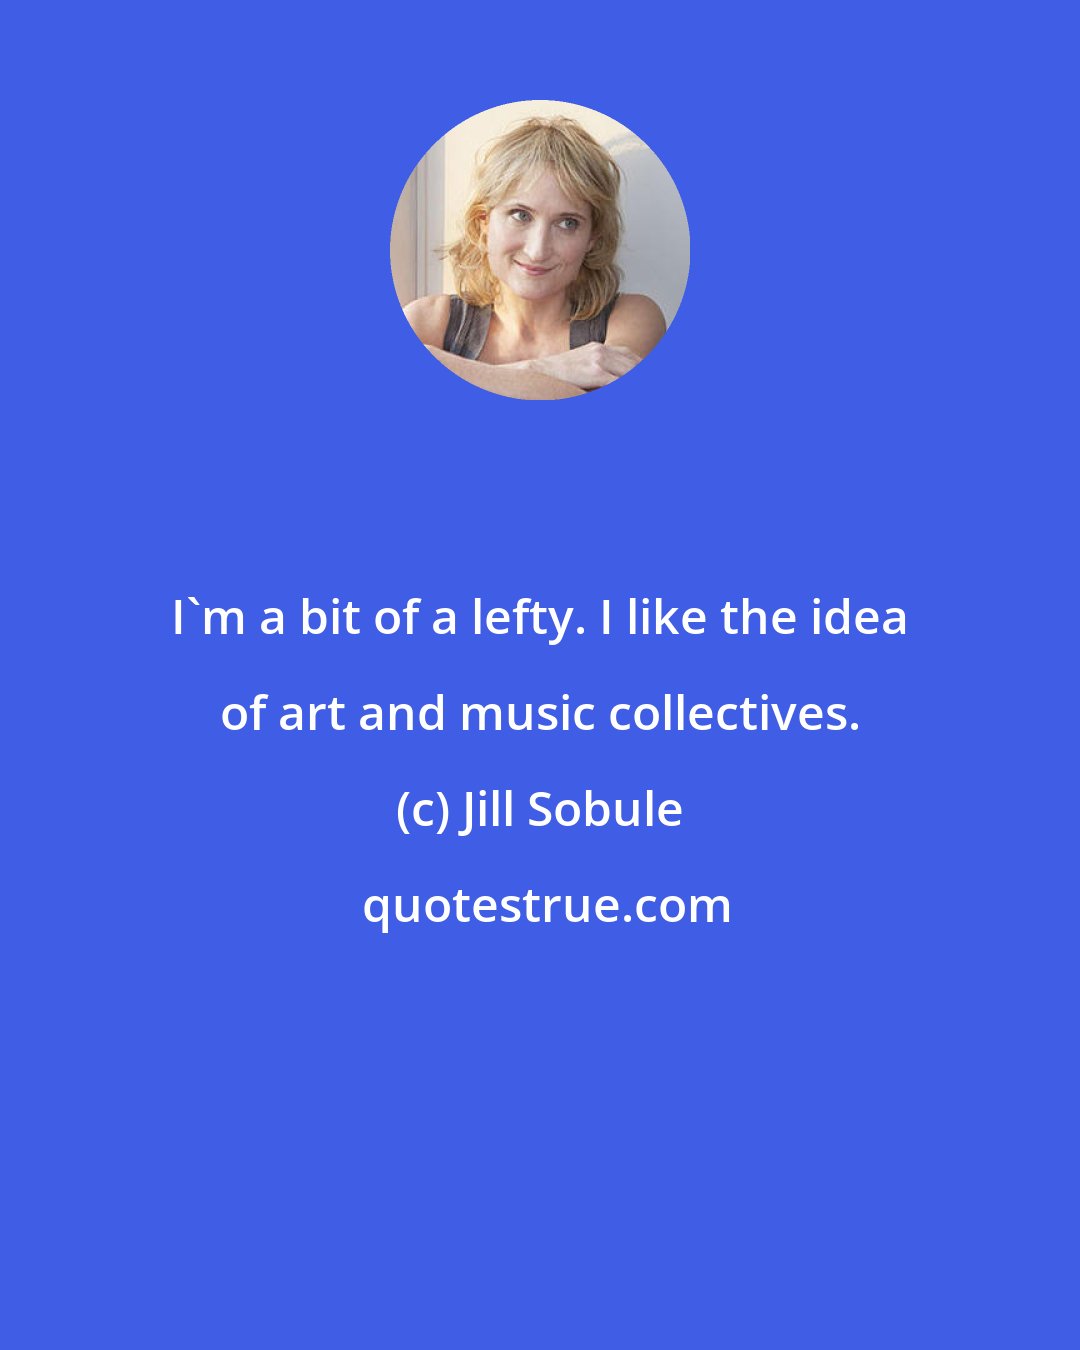 Jill Sobule: I'm a bit of a lefty. I like the idea of art and music collectives.